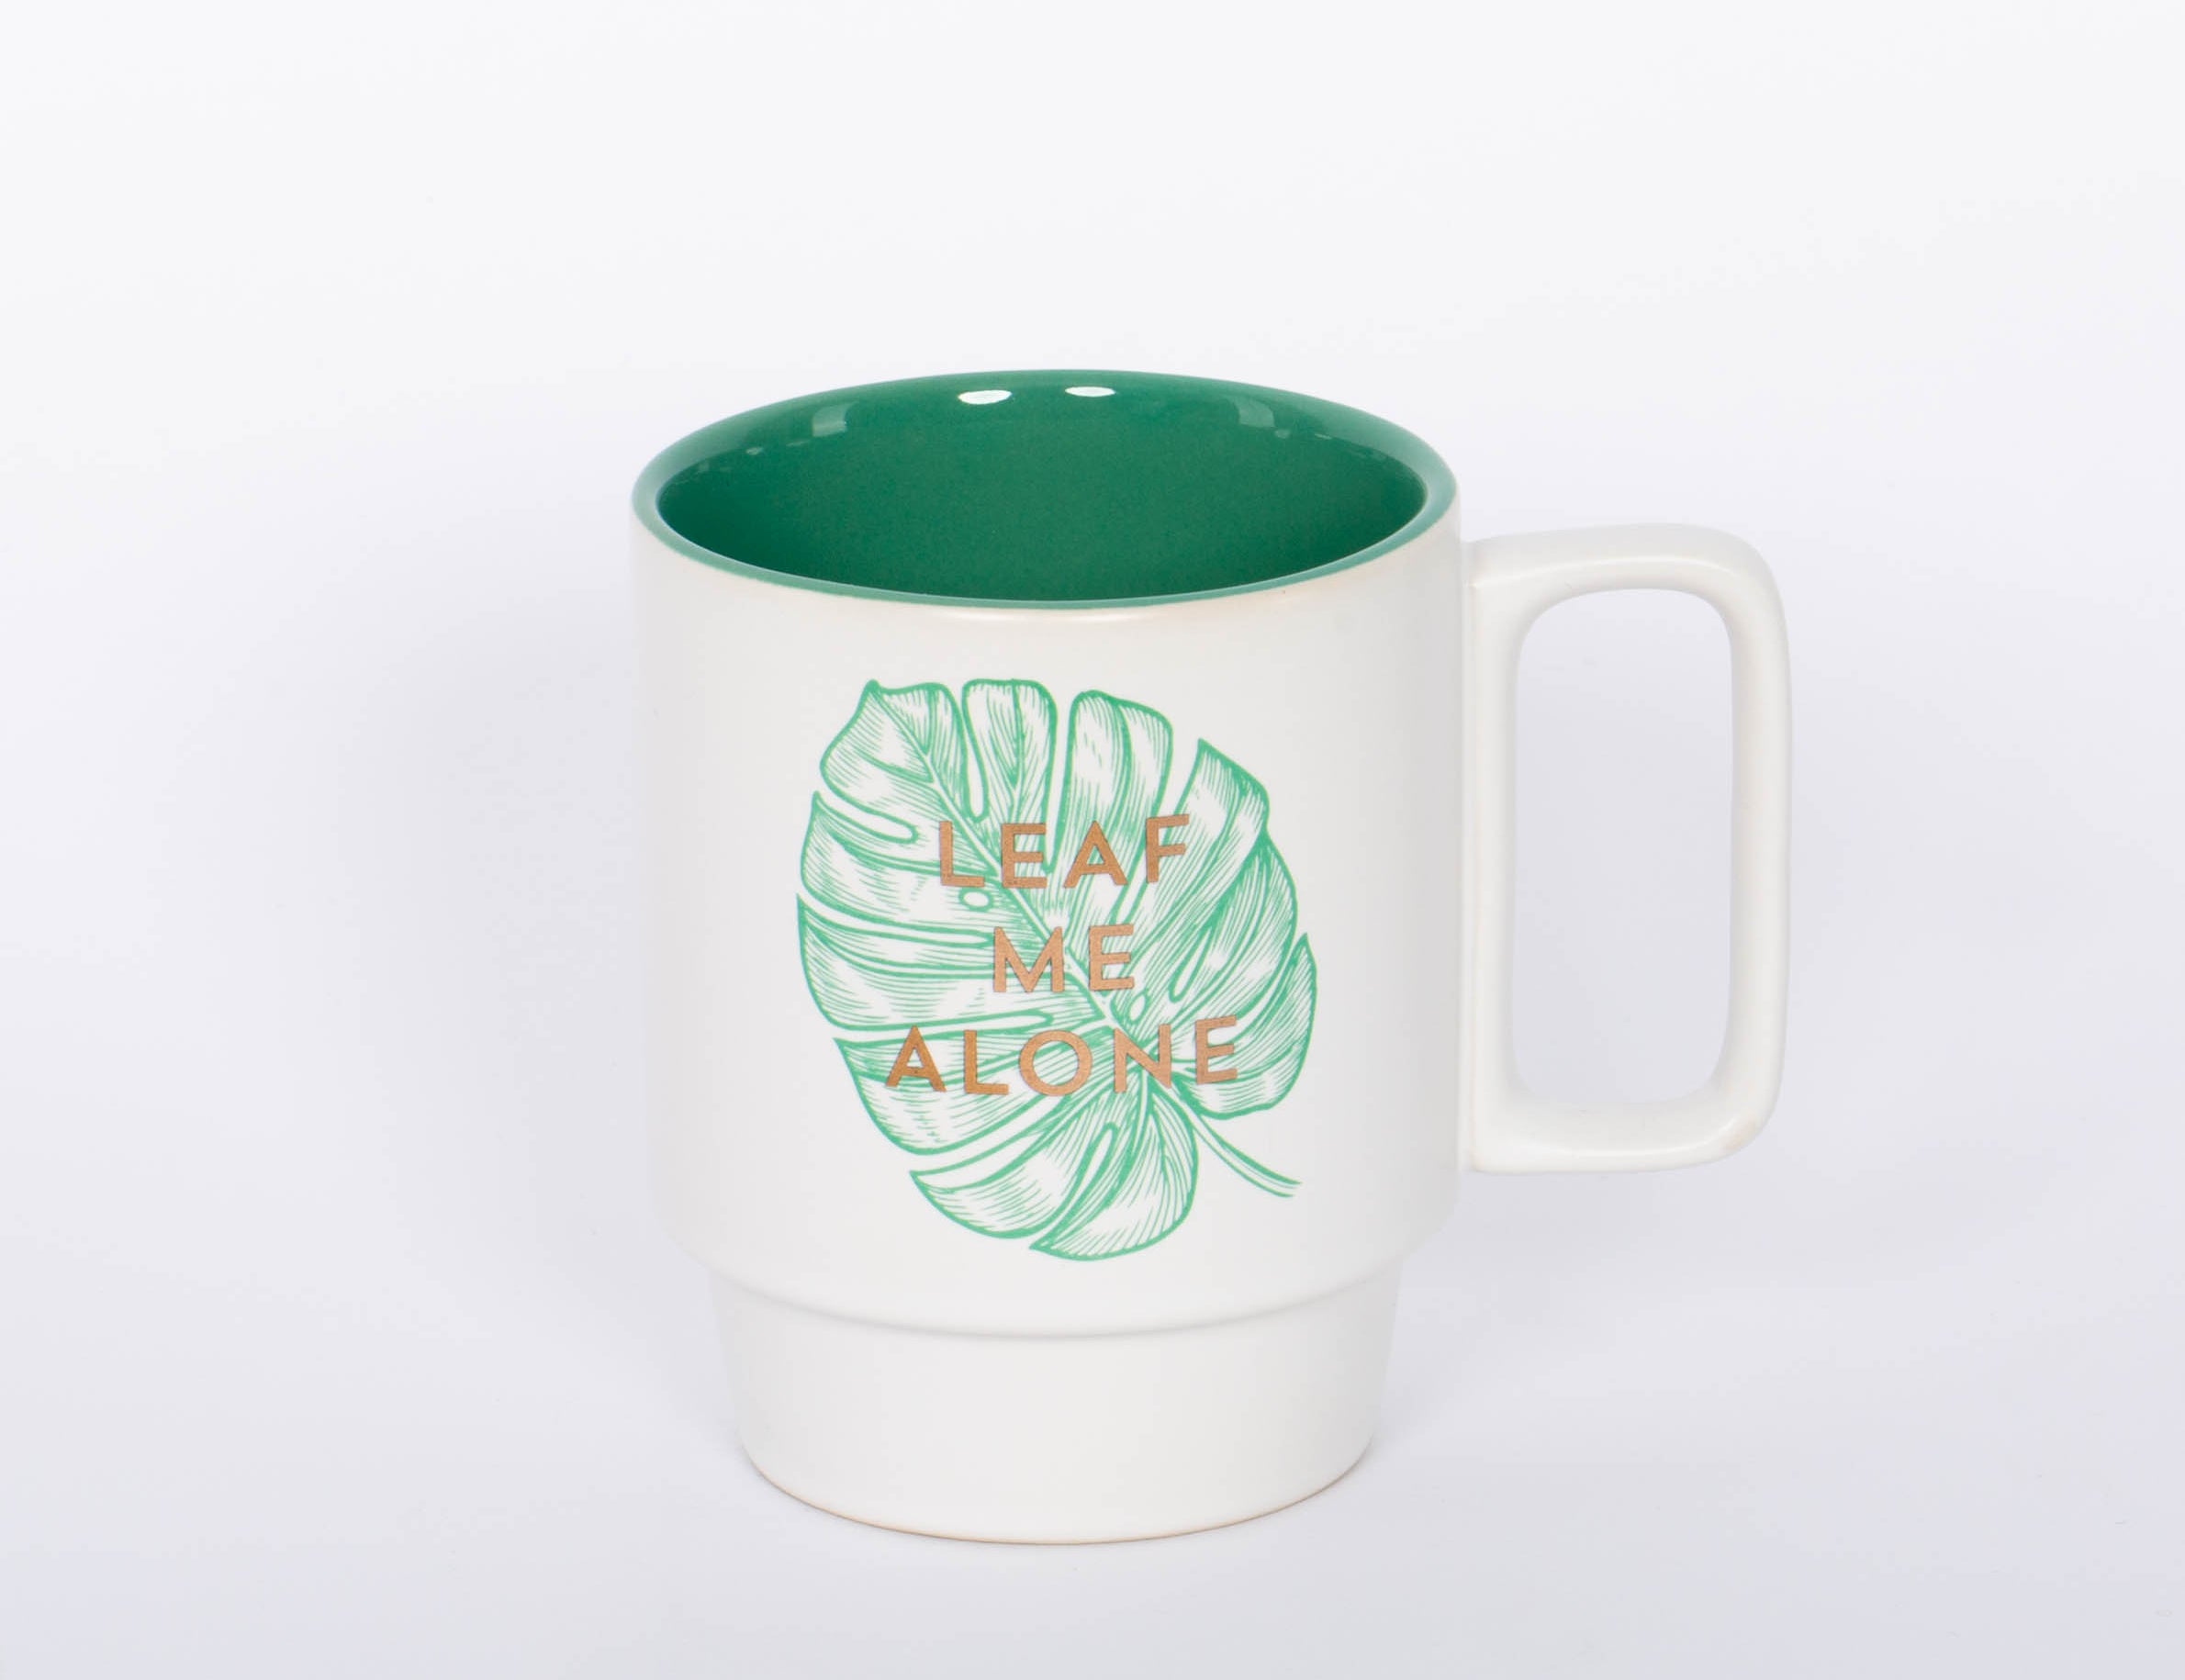 Leaf Me Alone Mug This 12 oz. monstera plant mug is the perfect companion to your morning routine whether itÕ's for a cup of coffee, hot cocoa, or tea. It also makes a great gift for the plant lover or introverted friend in your life!  3.25" D X 4.125" H 12 Oz Stackable Ceramic Mug Botanical Monstera Plant Illustration Metallic Gold Foil Accent